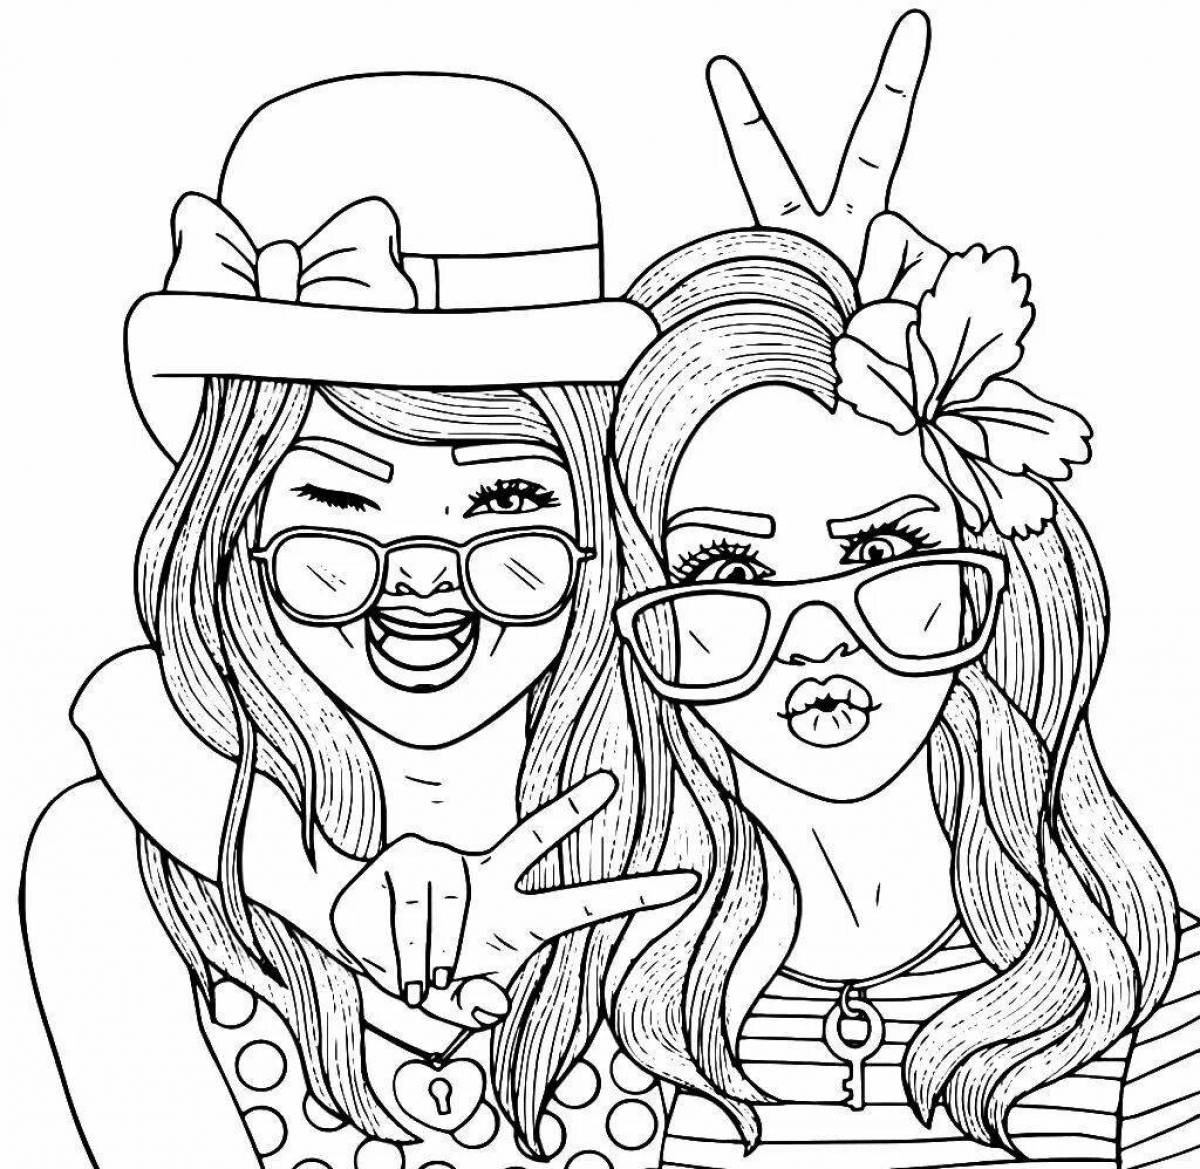 Color Explosion Coloring Page for 20 year old girls